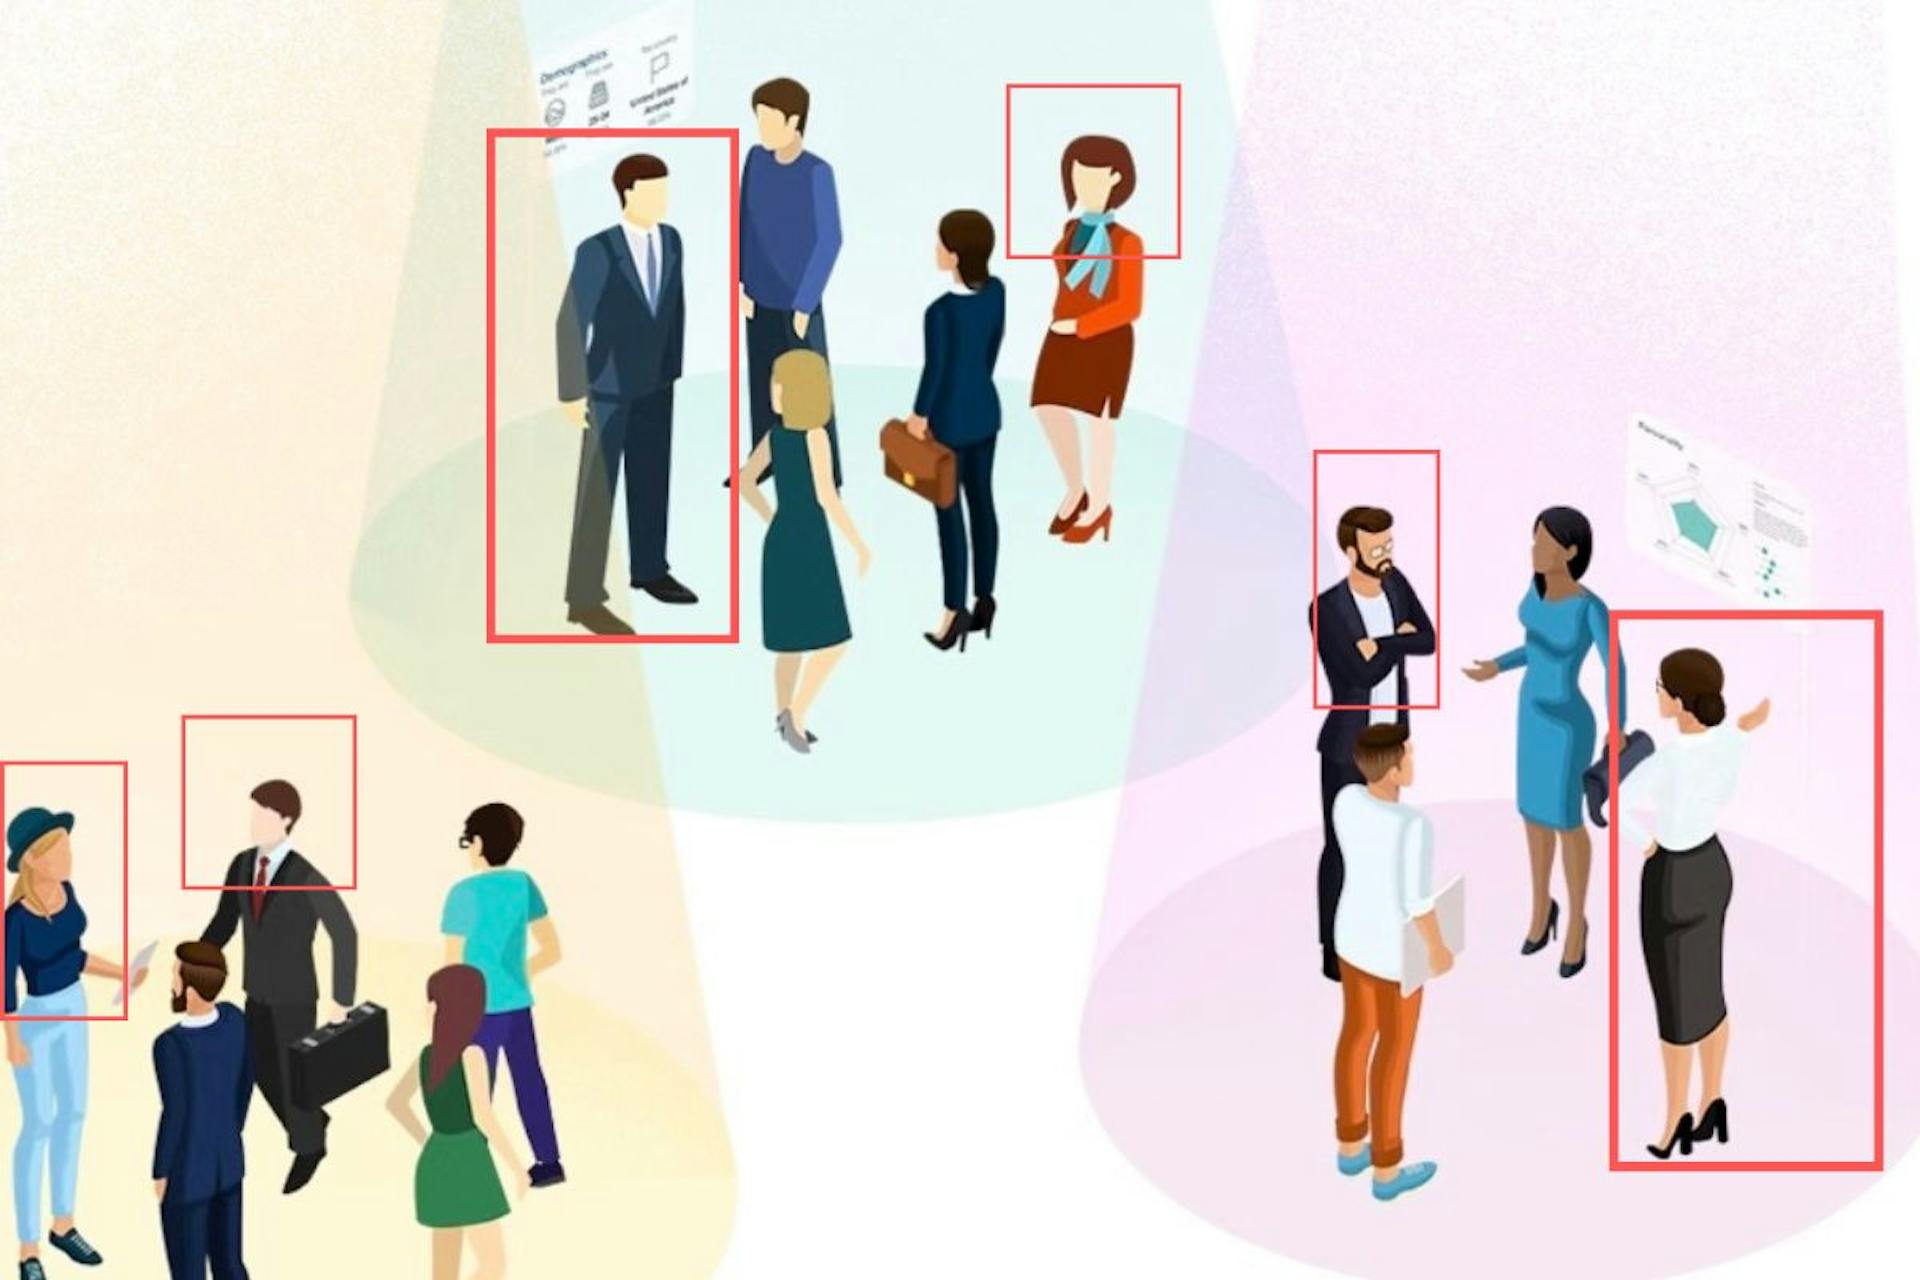  Illustrated people are standing in three groups and talking, around some of them we can see a red rectangle